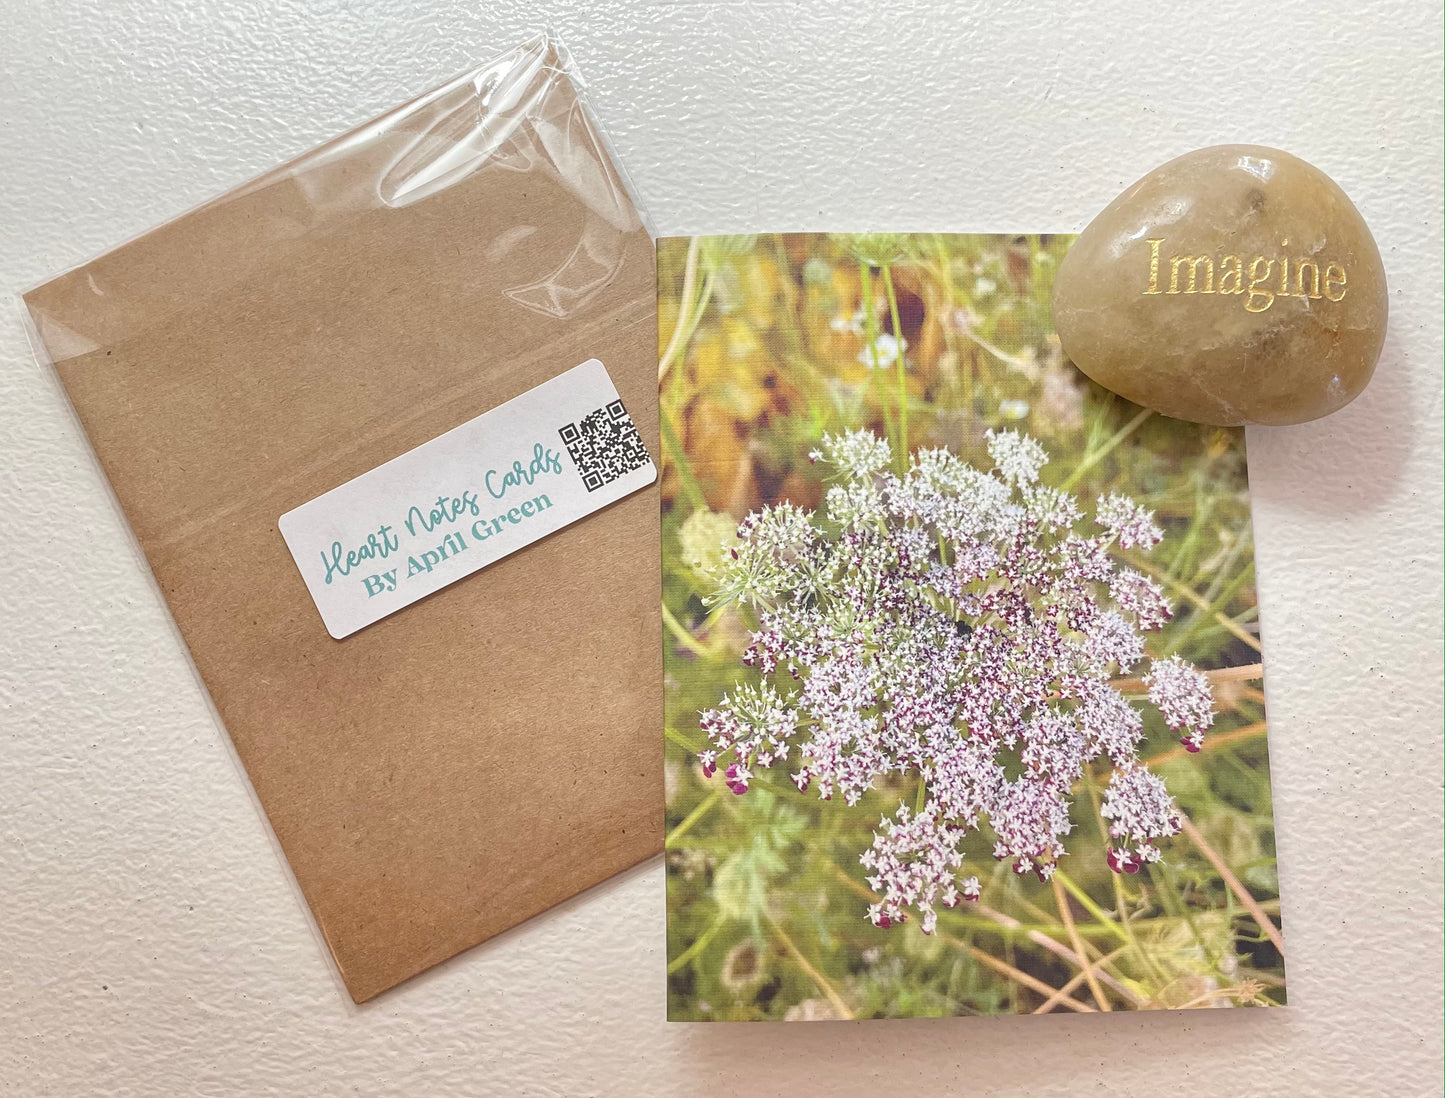 Delicate Lace Flower Single Nature Photography Greeting Card with Kraft Envelope